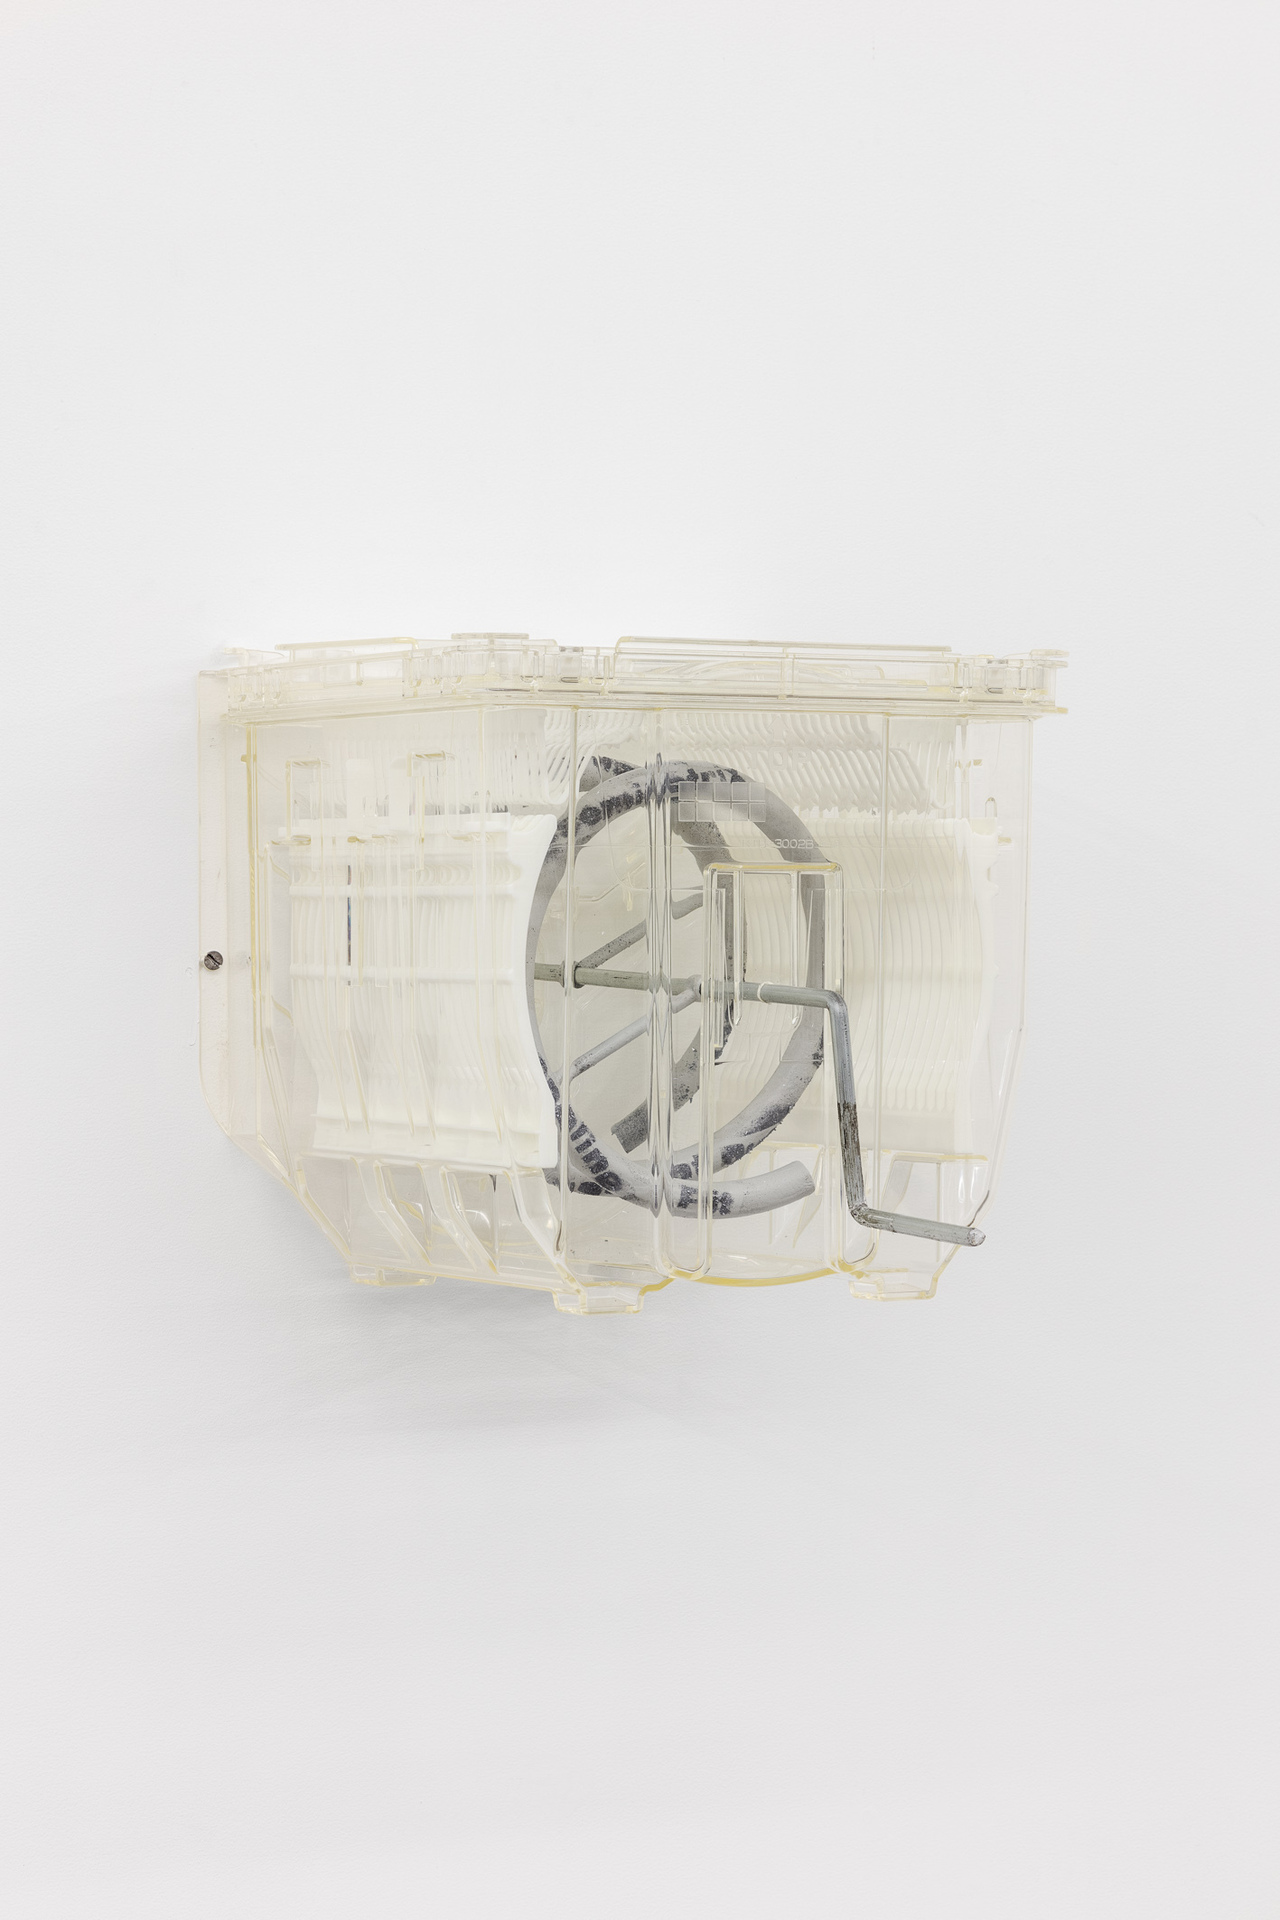 Jordan Halsall, Cognizant worker #1, 2021, Silicon wafer transport cassette, epoxy finished thermoplastic, 38x38x27cm